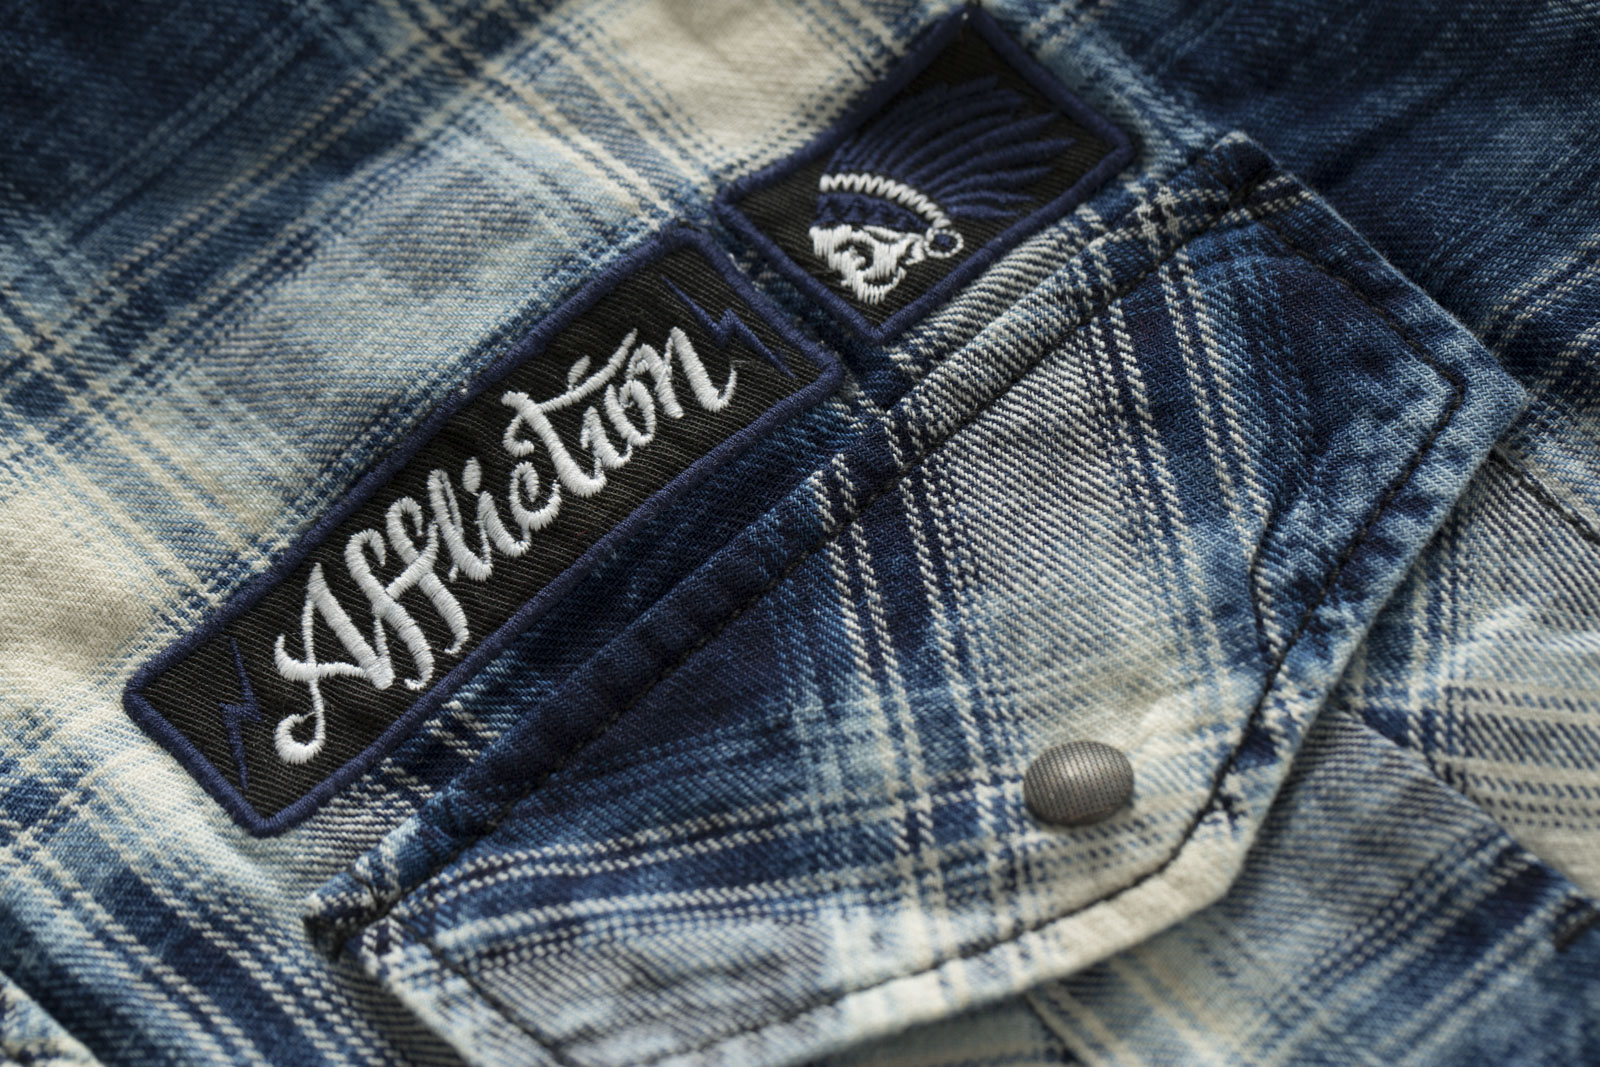 Affliction Shirt Pinnacle Peak Button-down with affliction logo patches